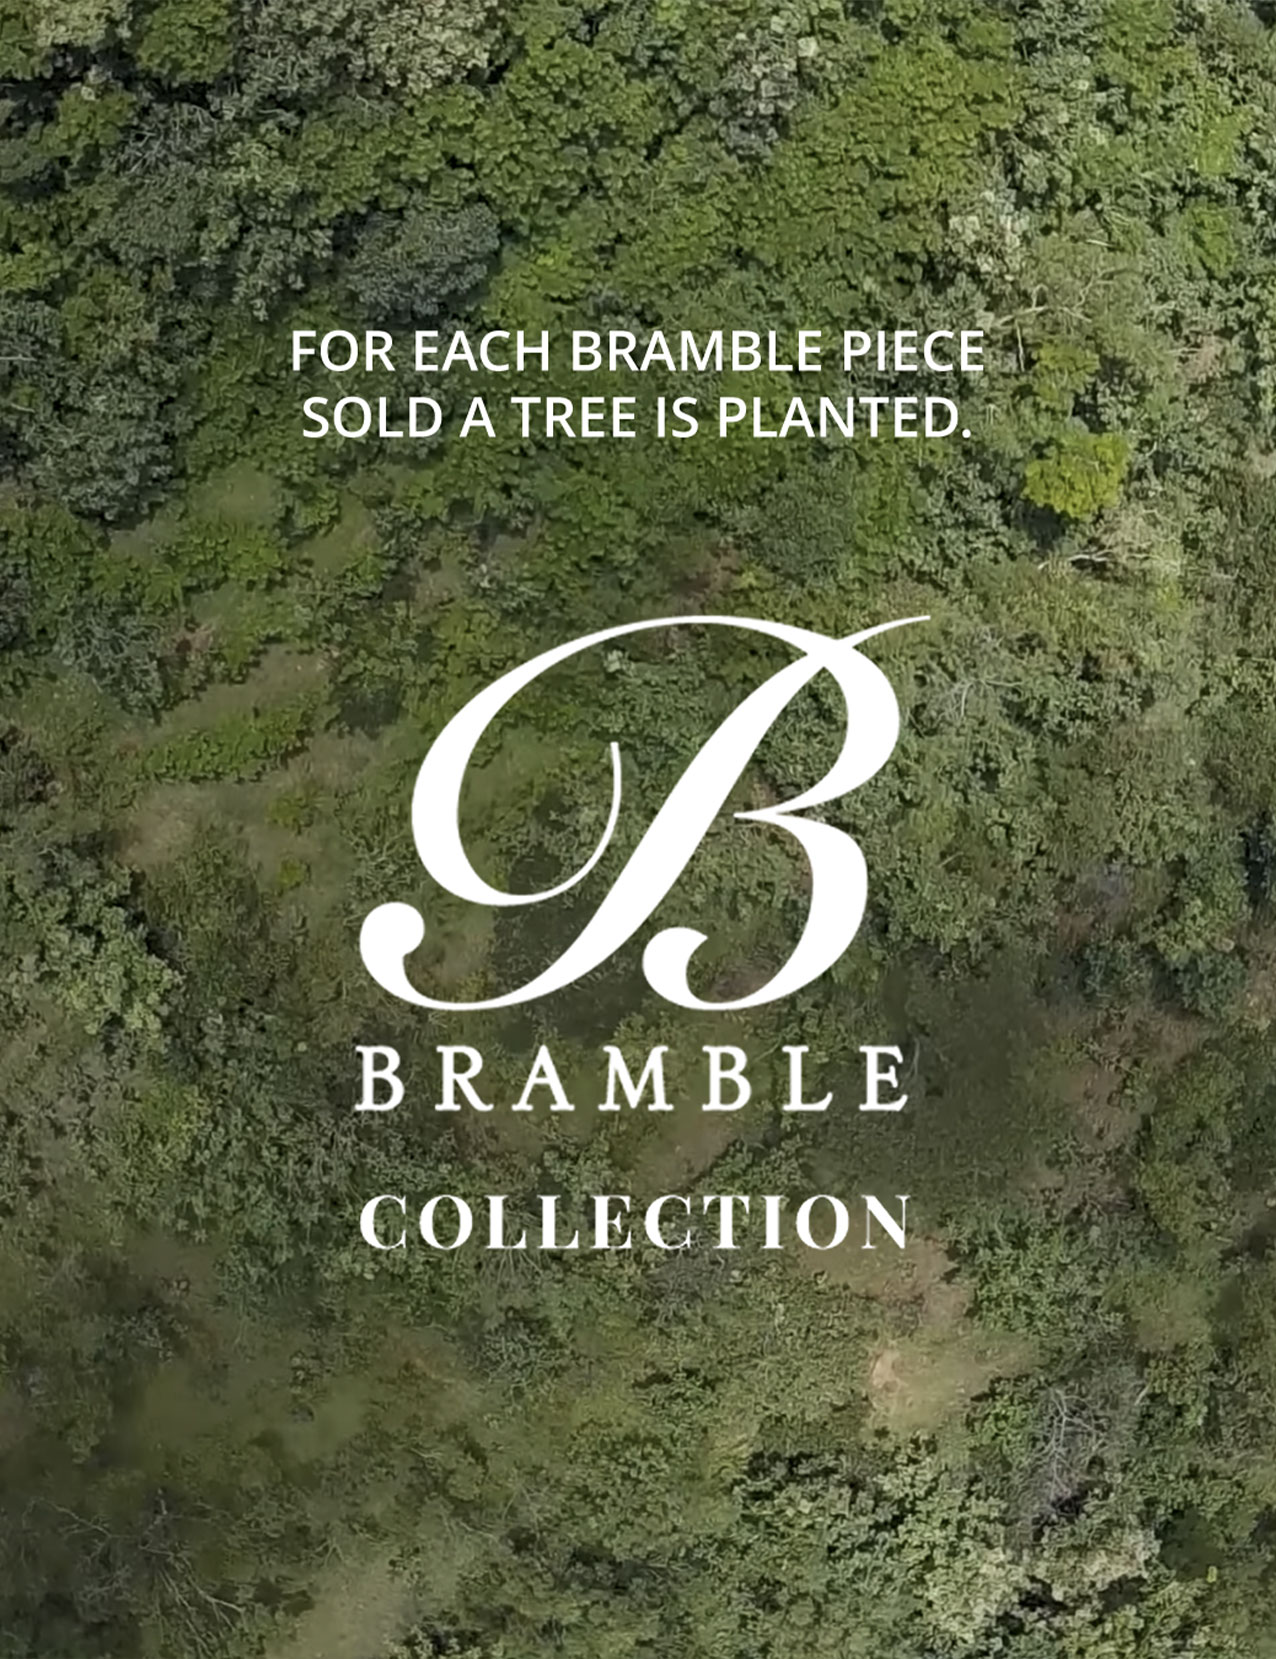 Bramble Collection of Quality Traditional Furniture 